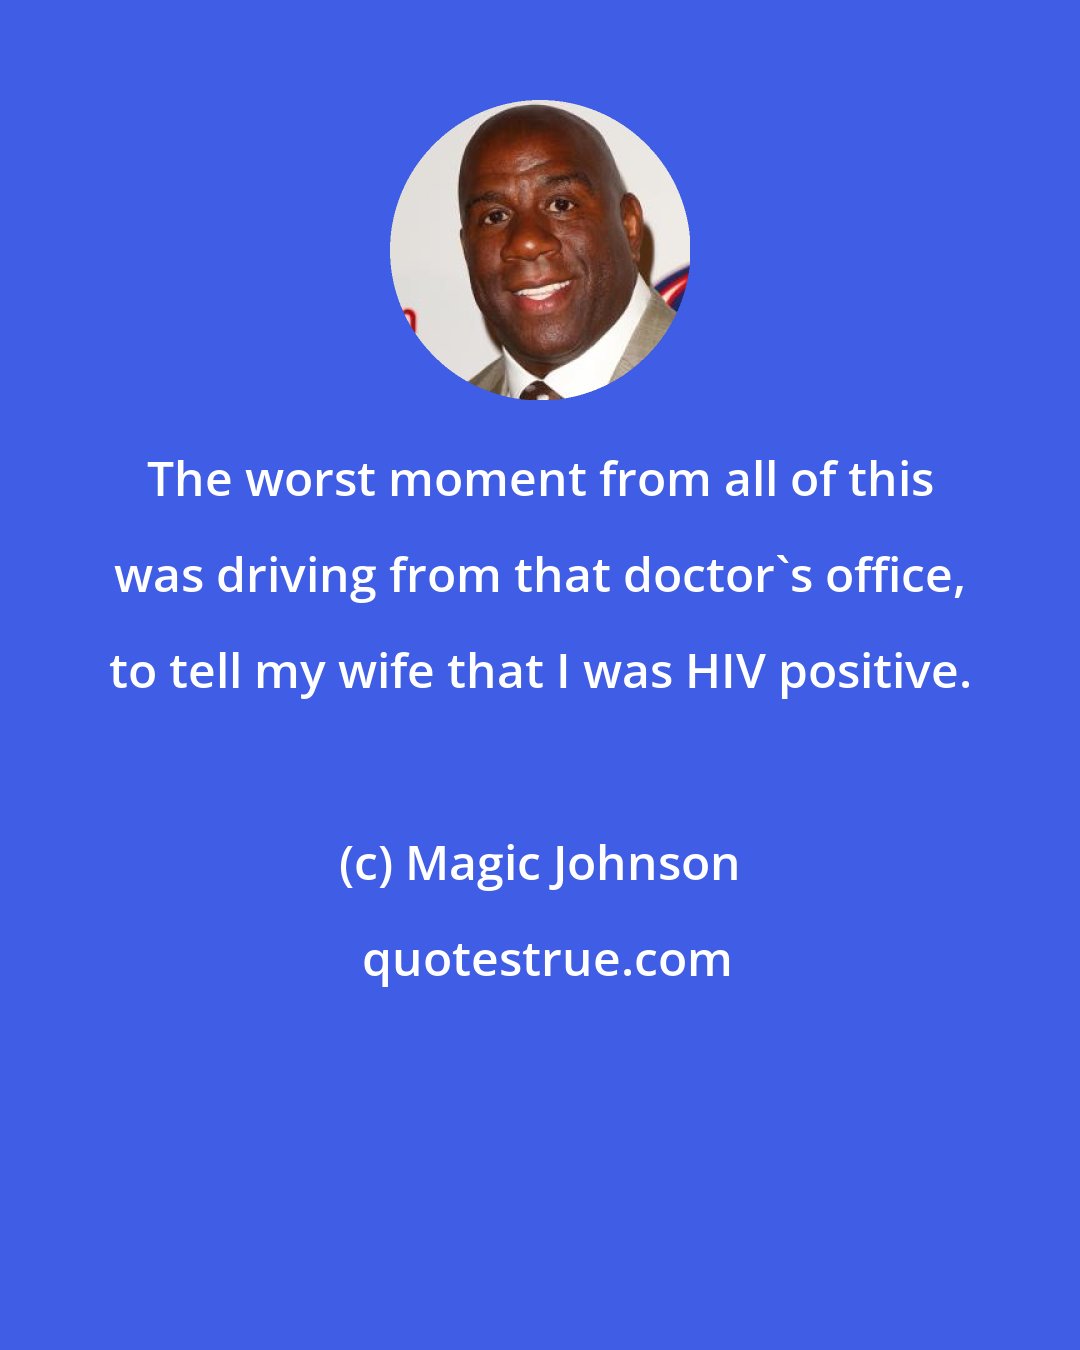 Magic Johnson: The worst moment from all of this was driving from that doctor's office, to tell my wife that I was HIV positive.